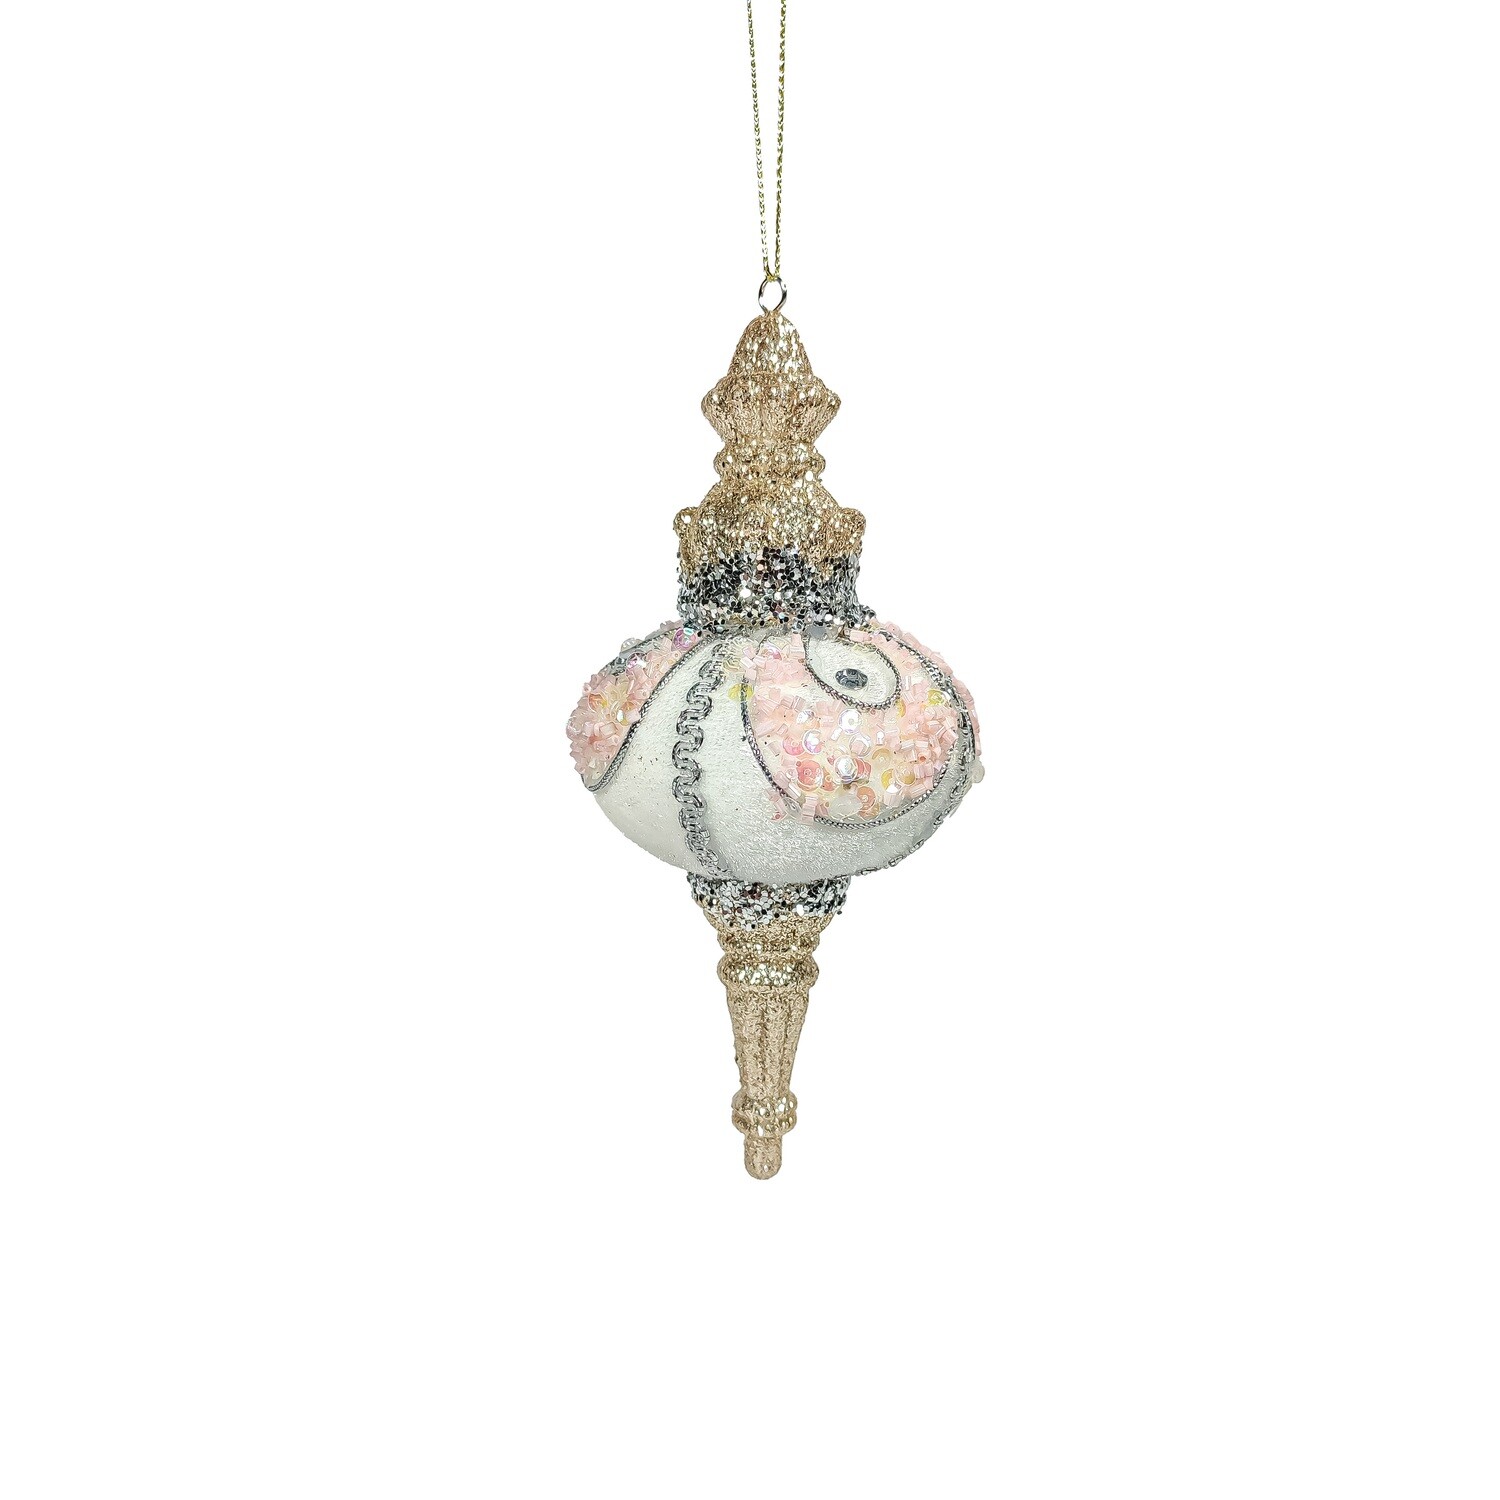 Hanging Ornament Pink,White And Gold 8x8x17cm